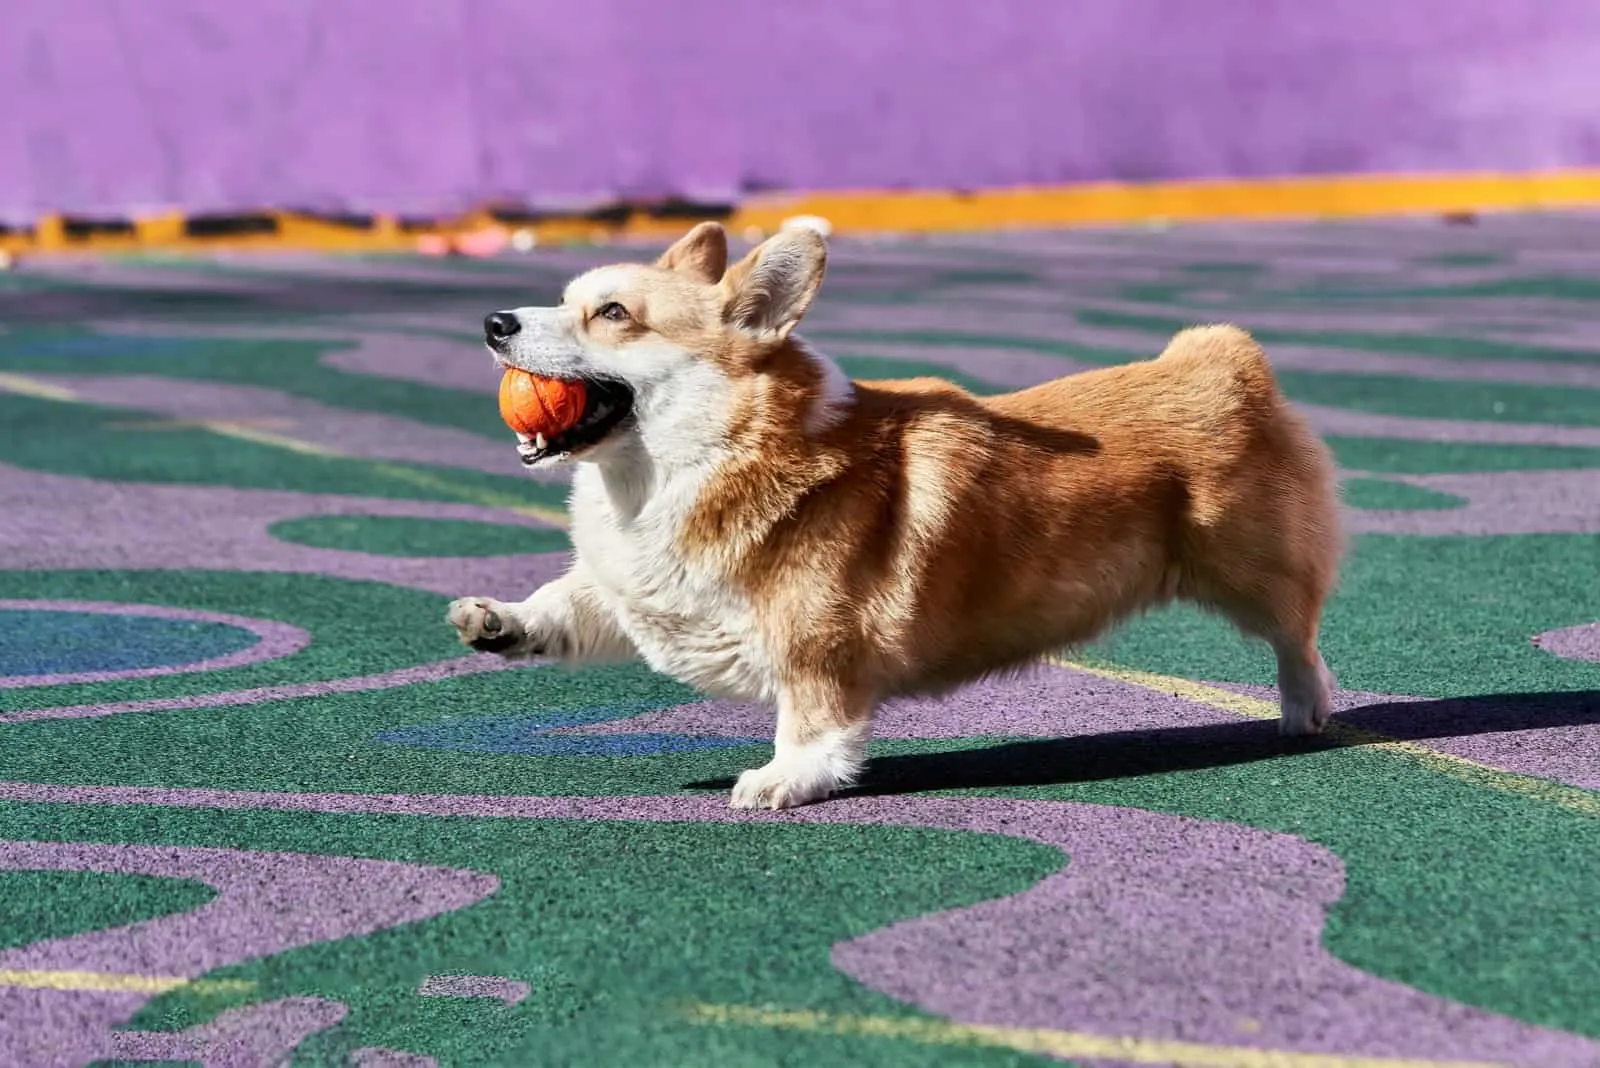 Corgi dog plays while holding an orange ball in his mouth